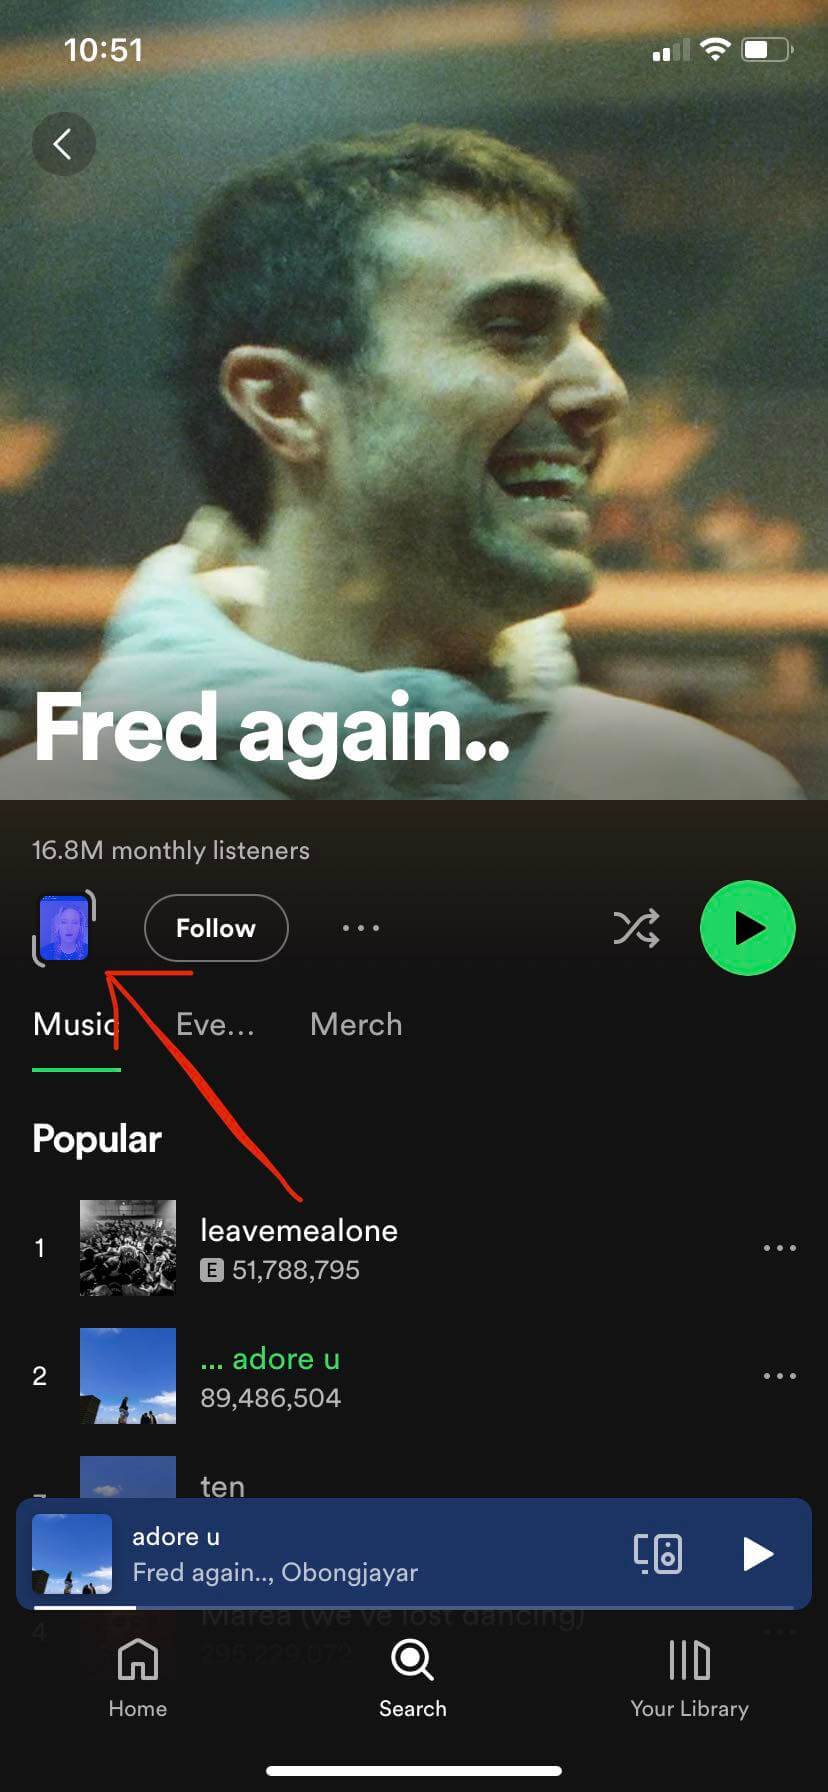 Screenshot of Spotify on Fred again..'s profile